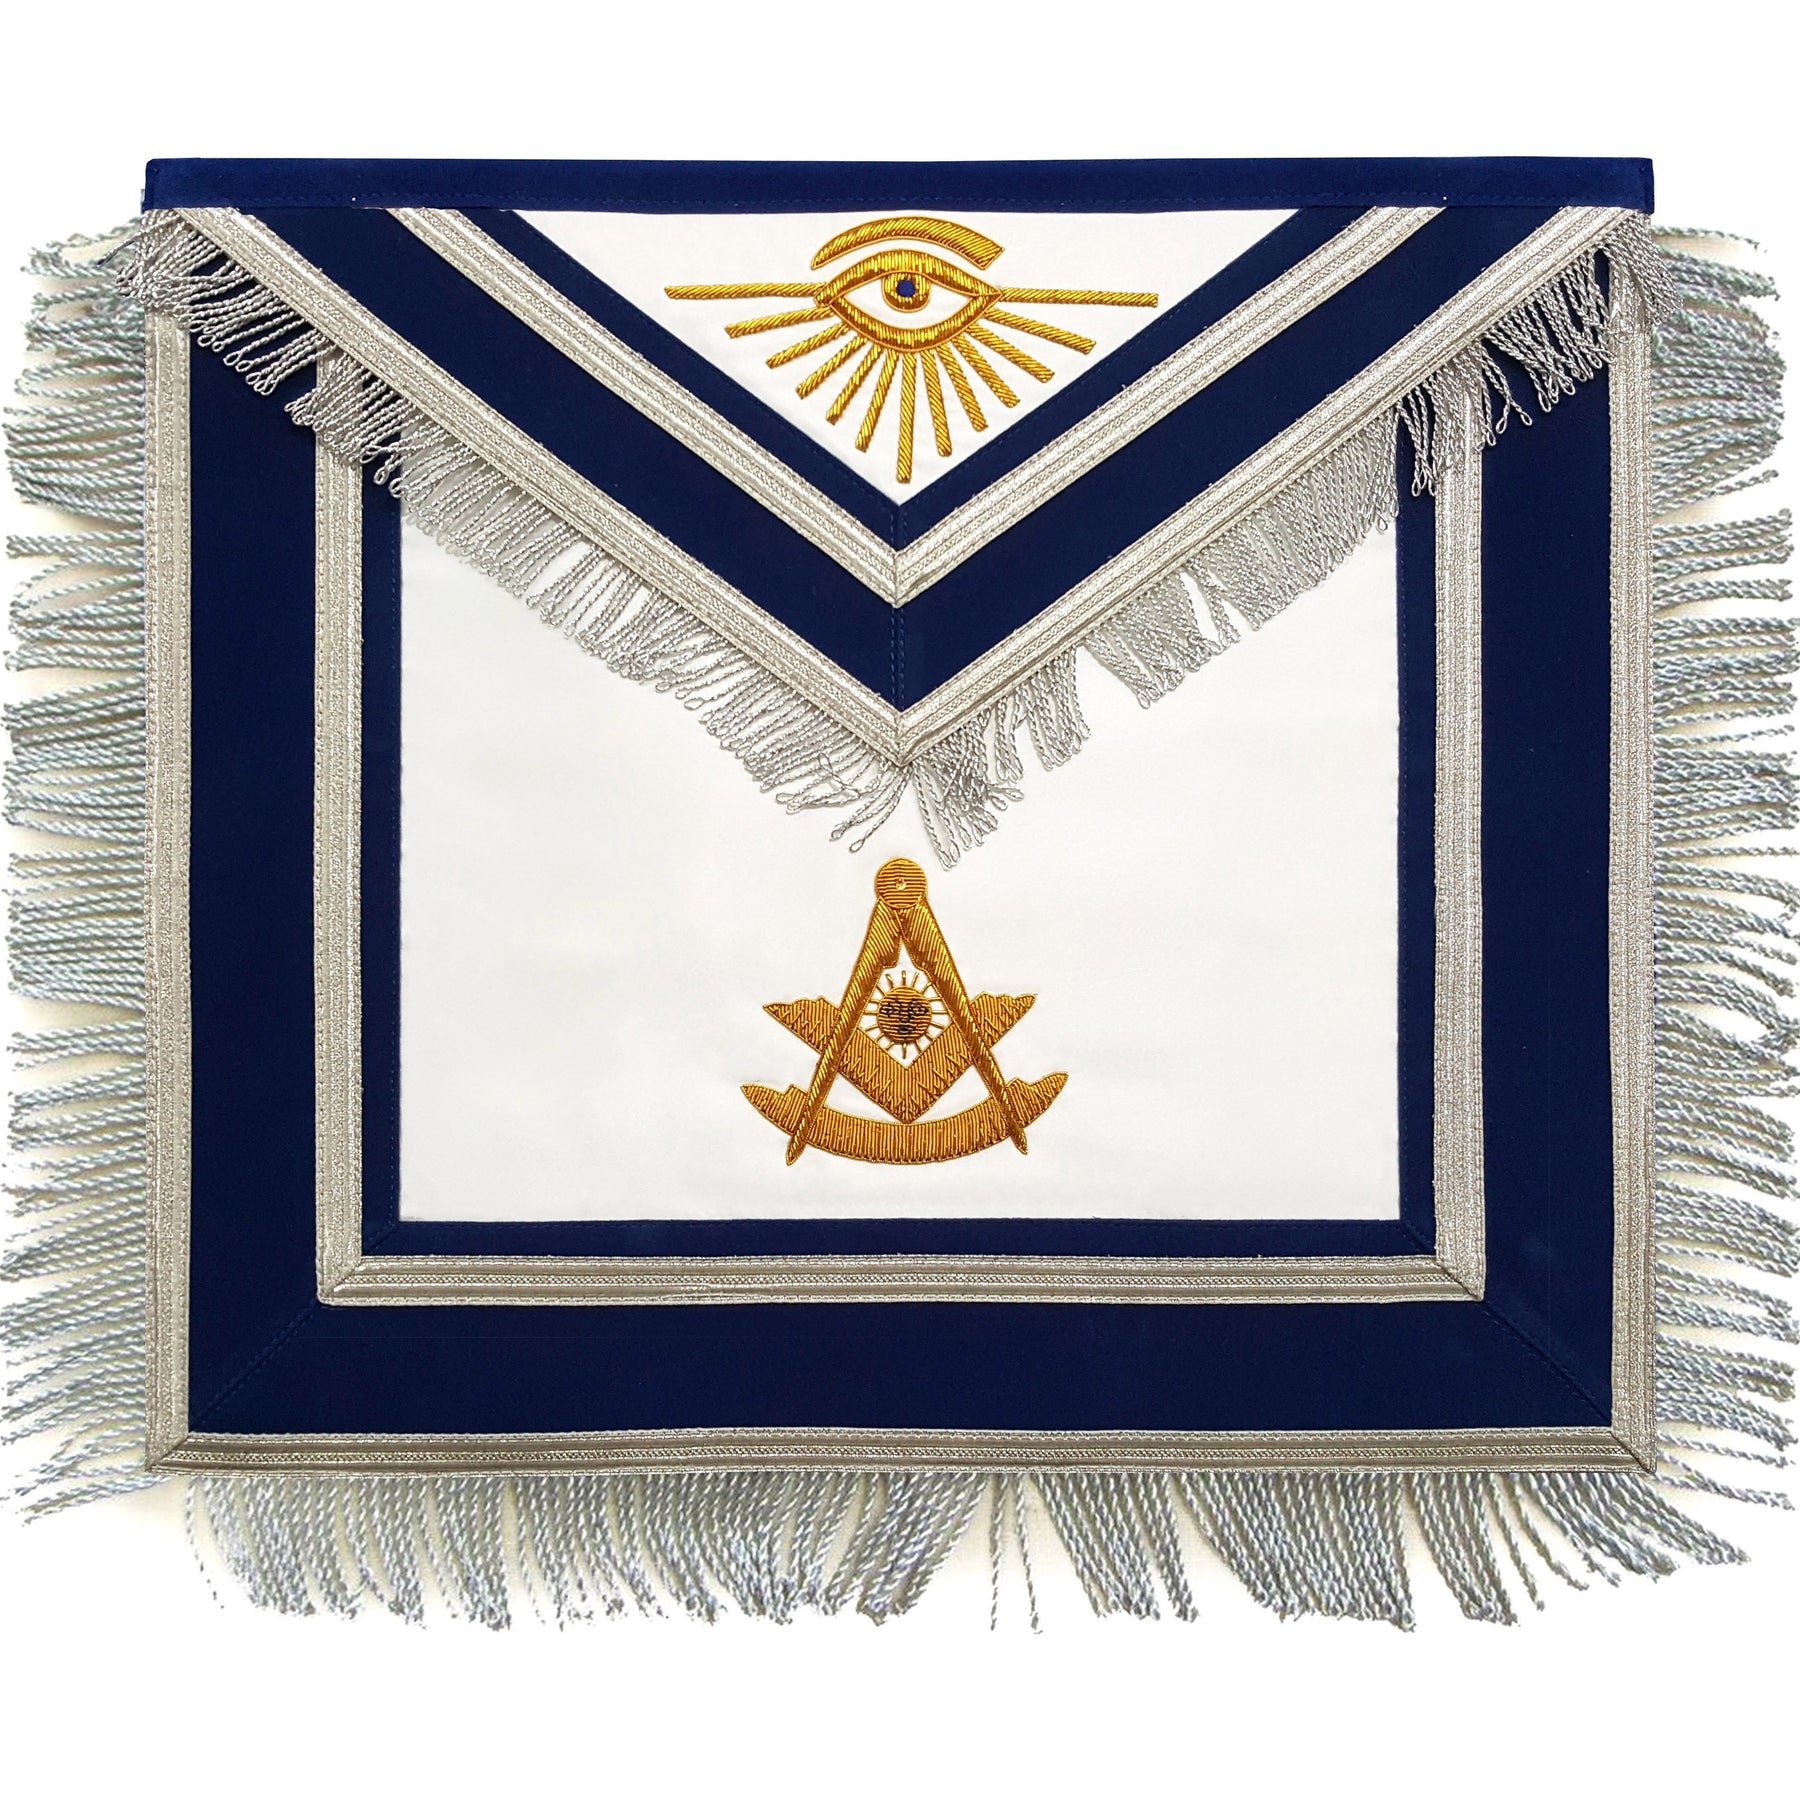 Past Master Blue Lodge Apron - Gold Hand Embroidered with Silver Fringe - Bricks Masons